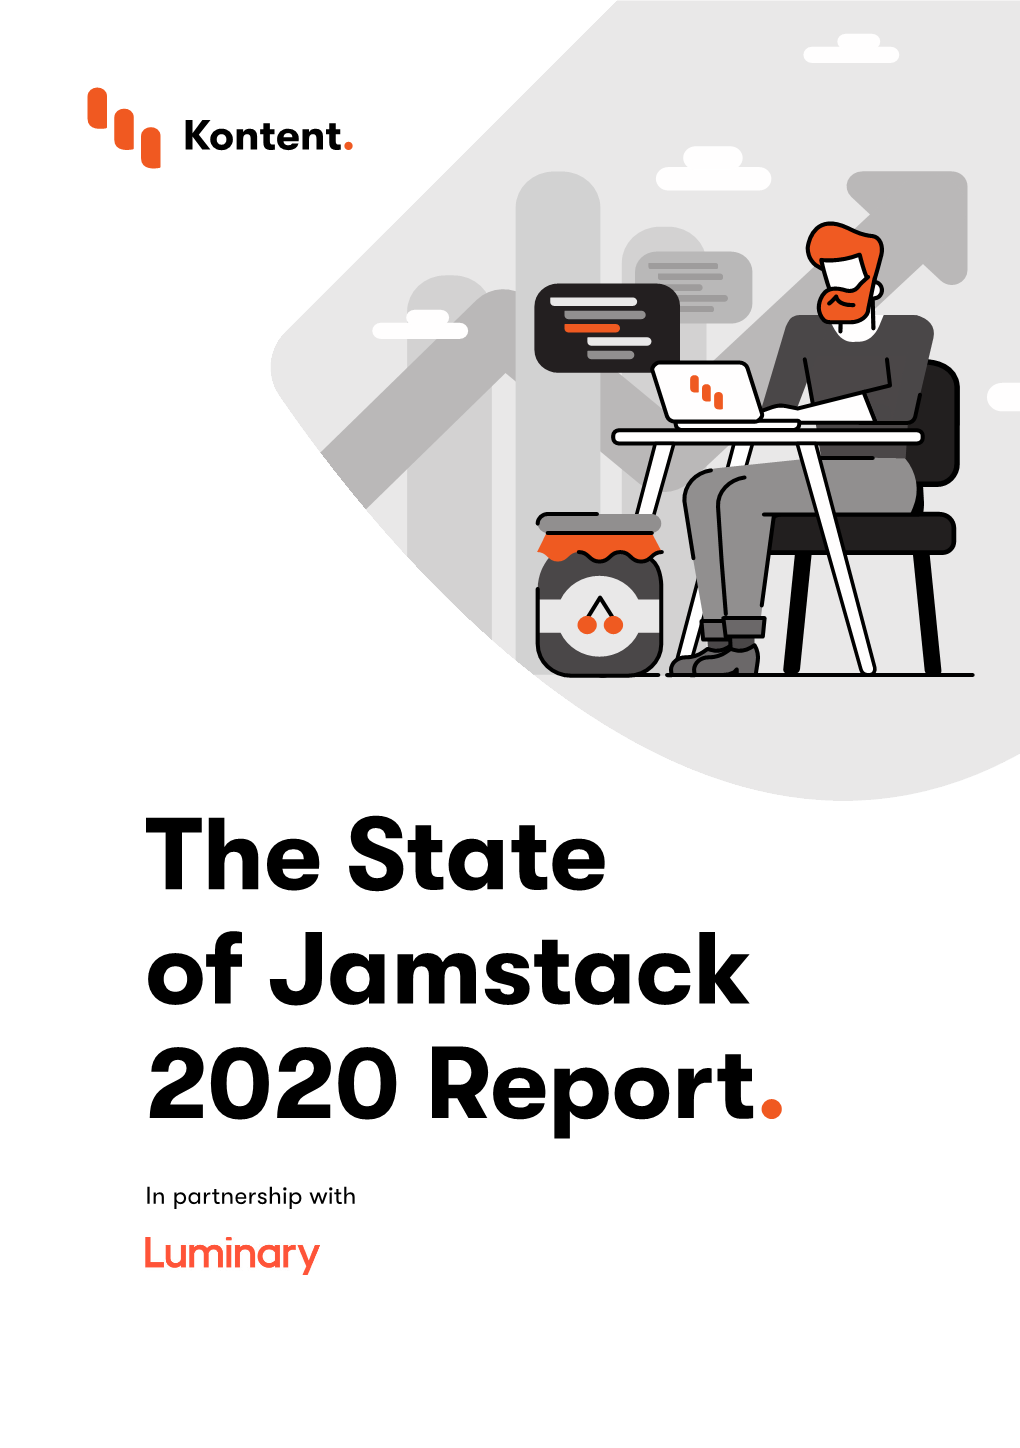 The State of Jamstack 2020 Report